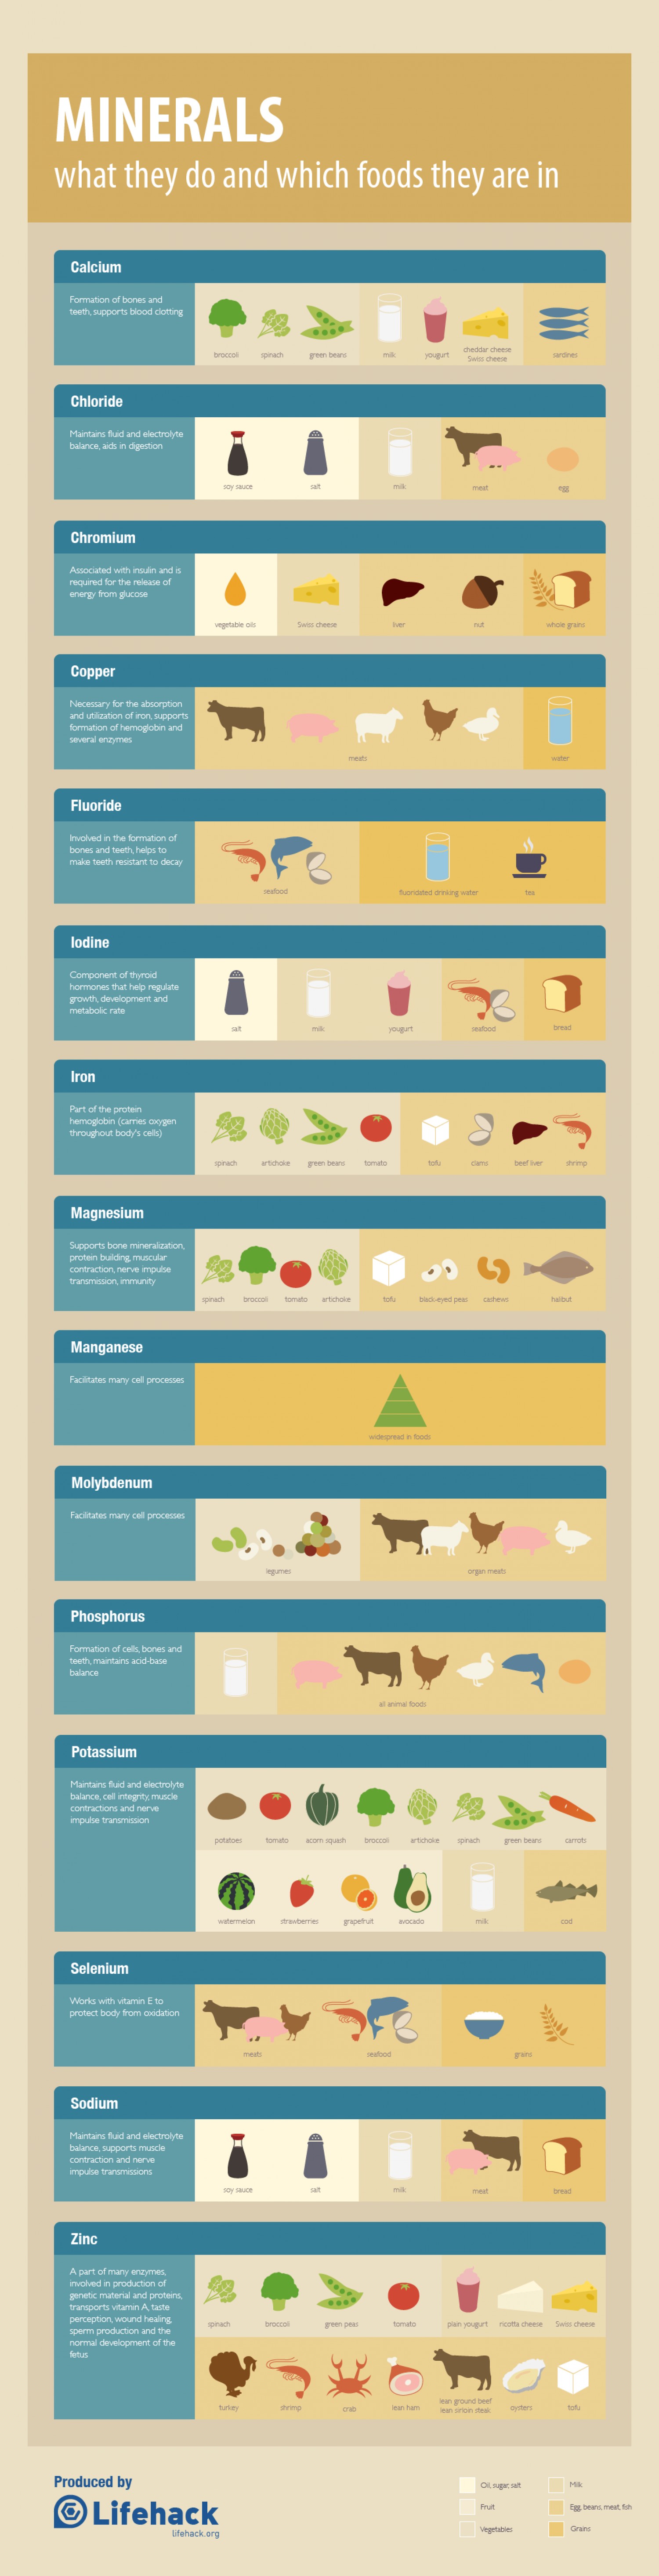 nutrition-minerals-cheat-sheet--food-sources_50cadd535f100_w1500